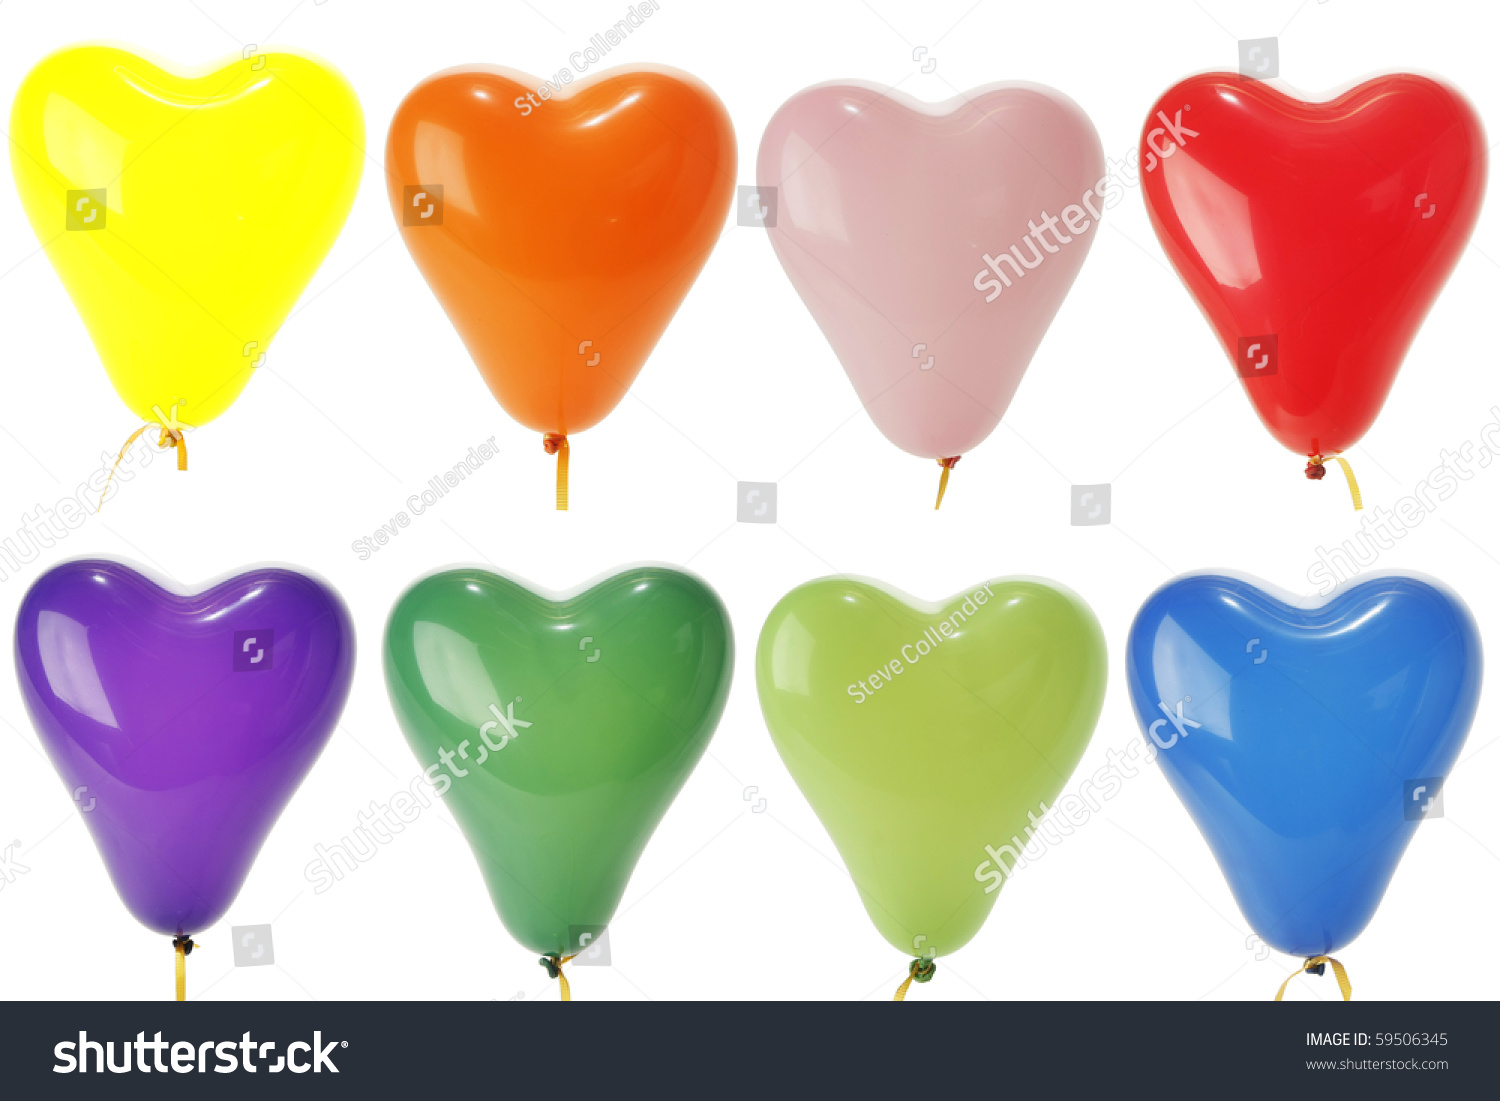 Colorful Heart Shape Balloons, Yellow, Red,Orange,blue,green,pink,purple,blue, Isolated on white. #59506345